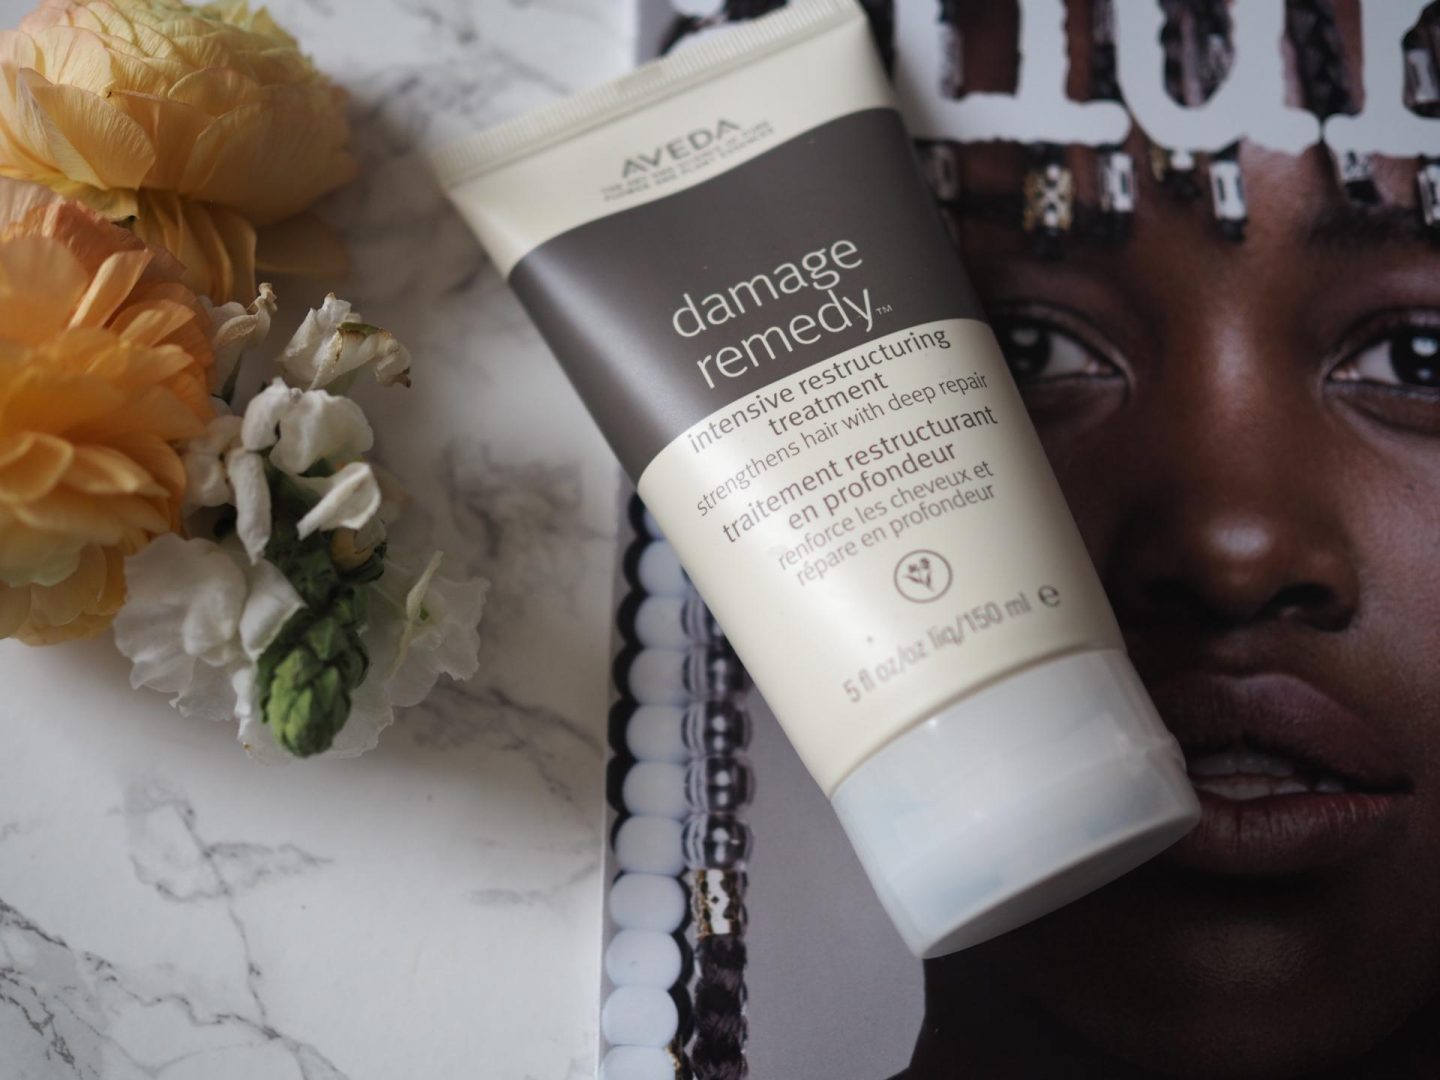 Aveda Damage Remedy Restructuring Treatment